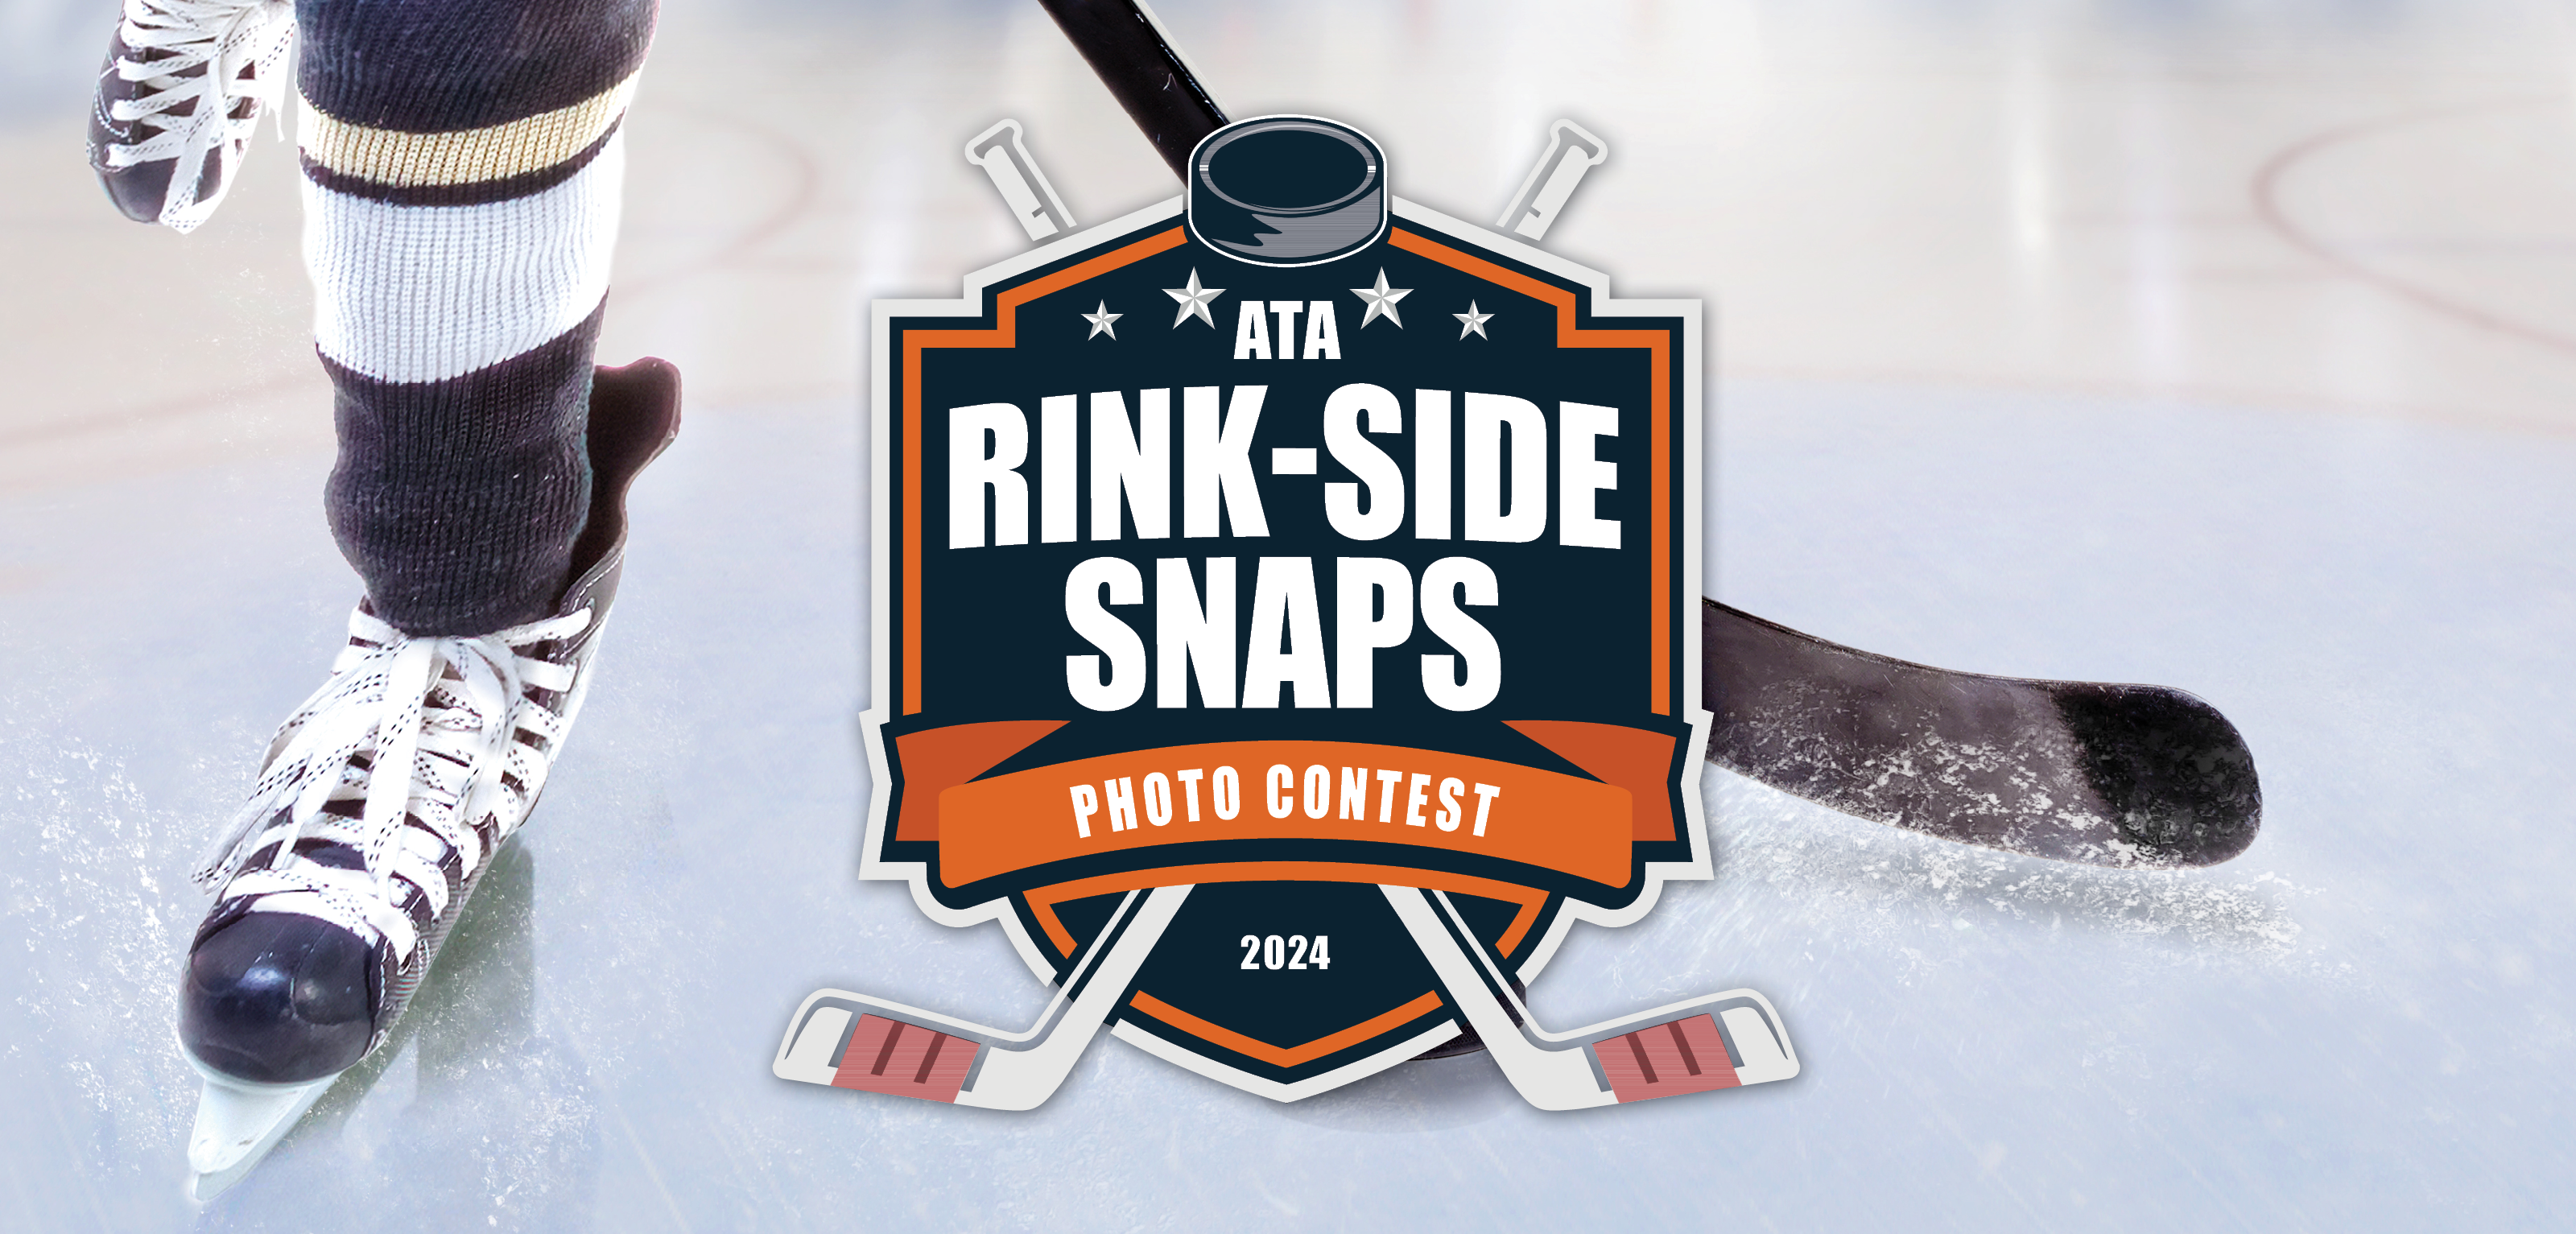 ATA Rink-Side Snaps Photo Contest